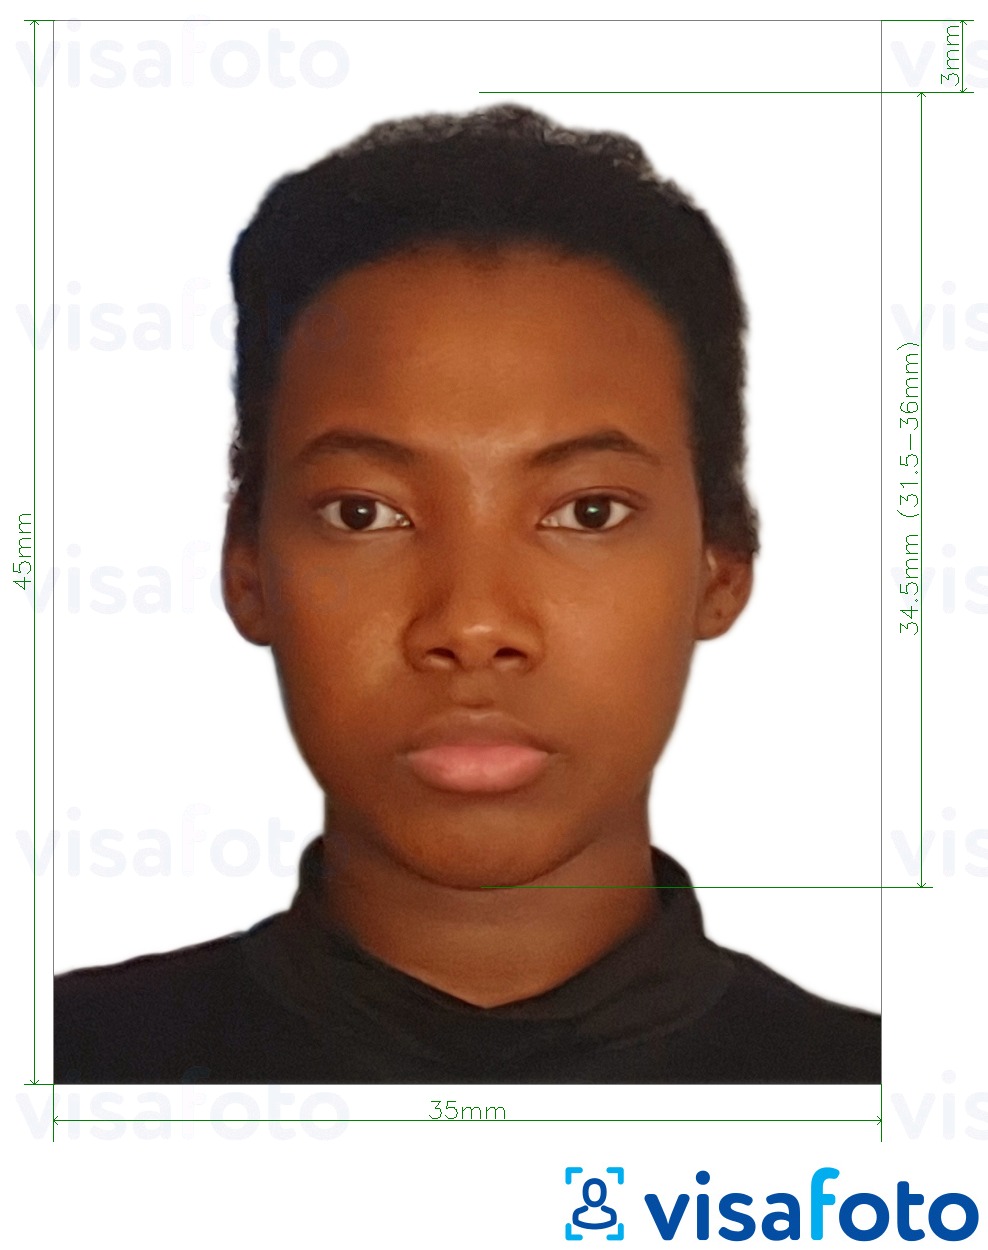 Example of photo for Malawi passport 4.5x3.5 cm (45x35 mm) with exact size specification